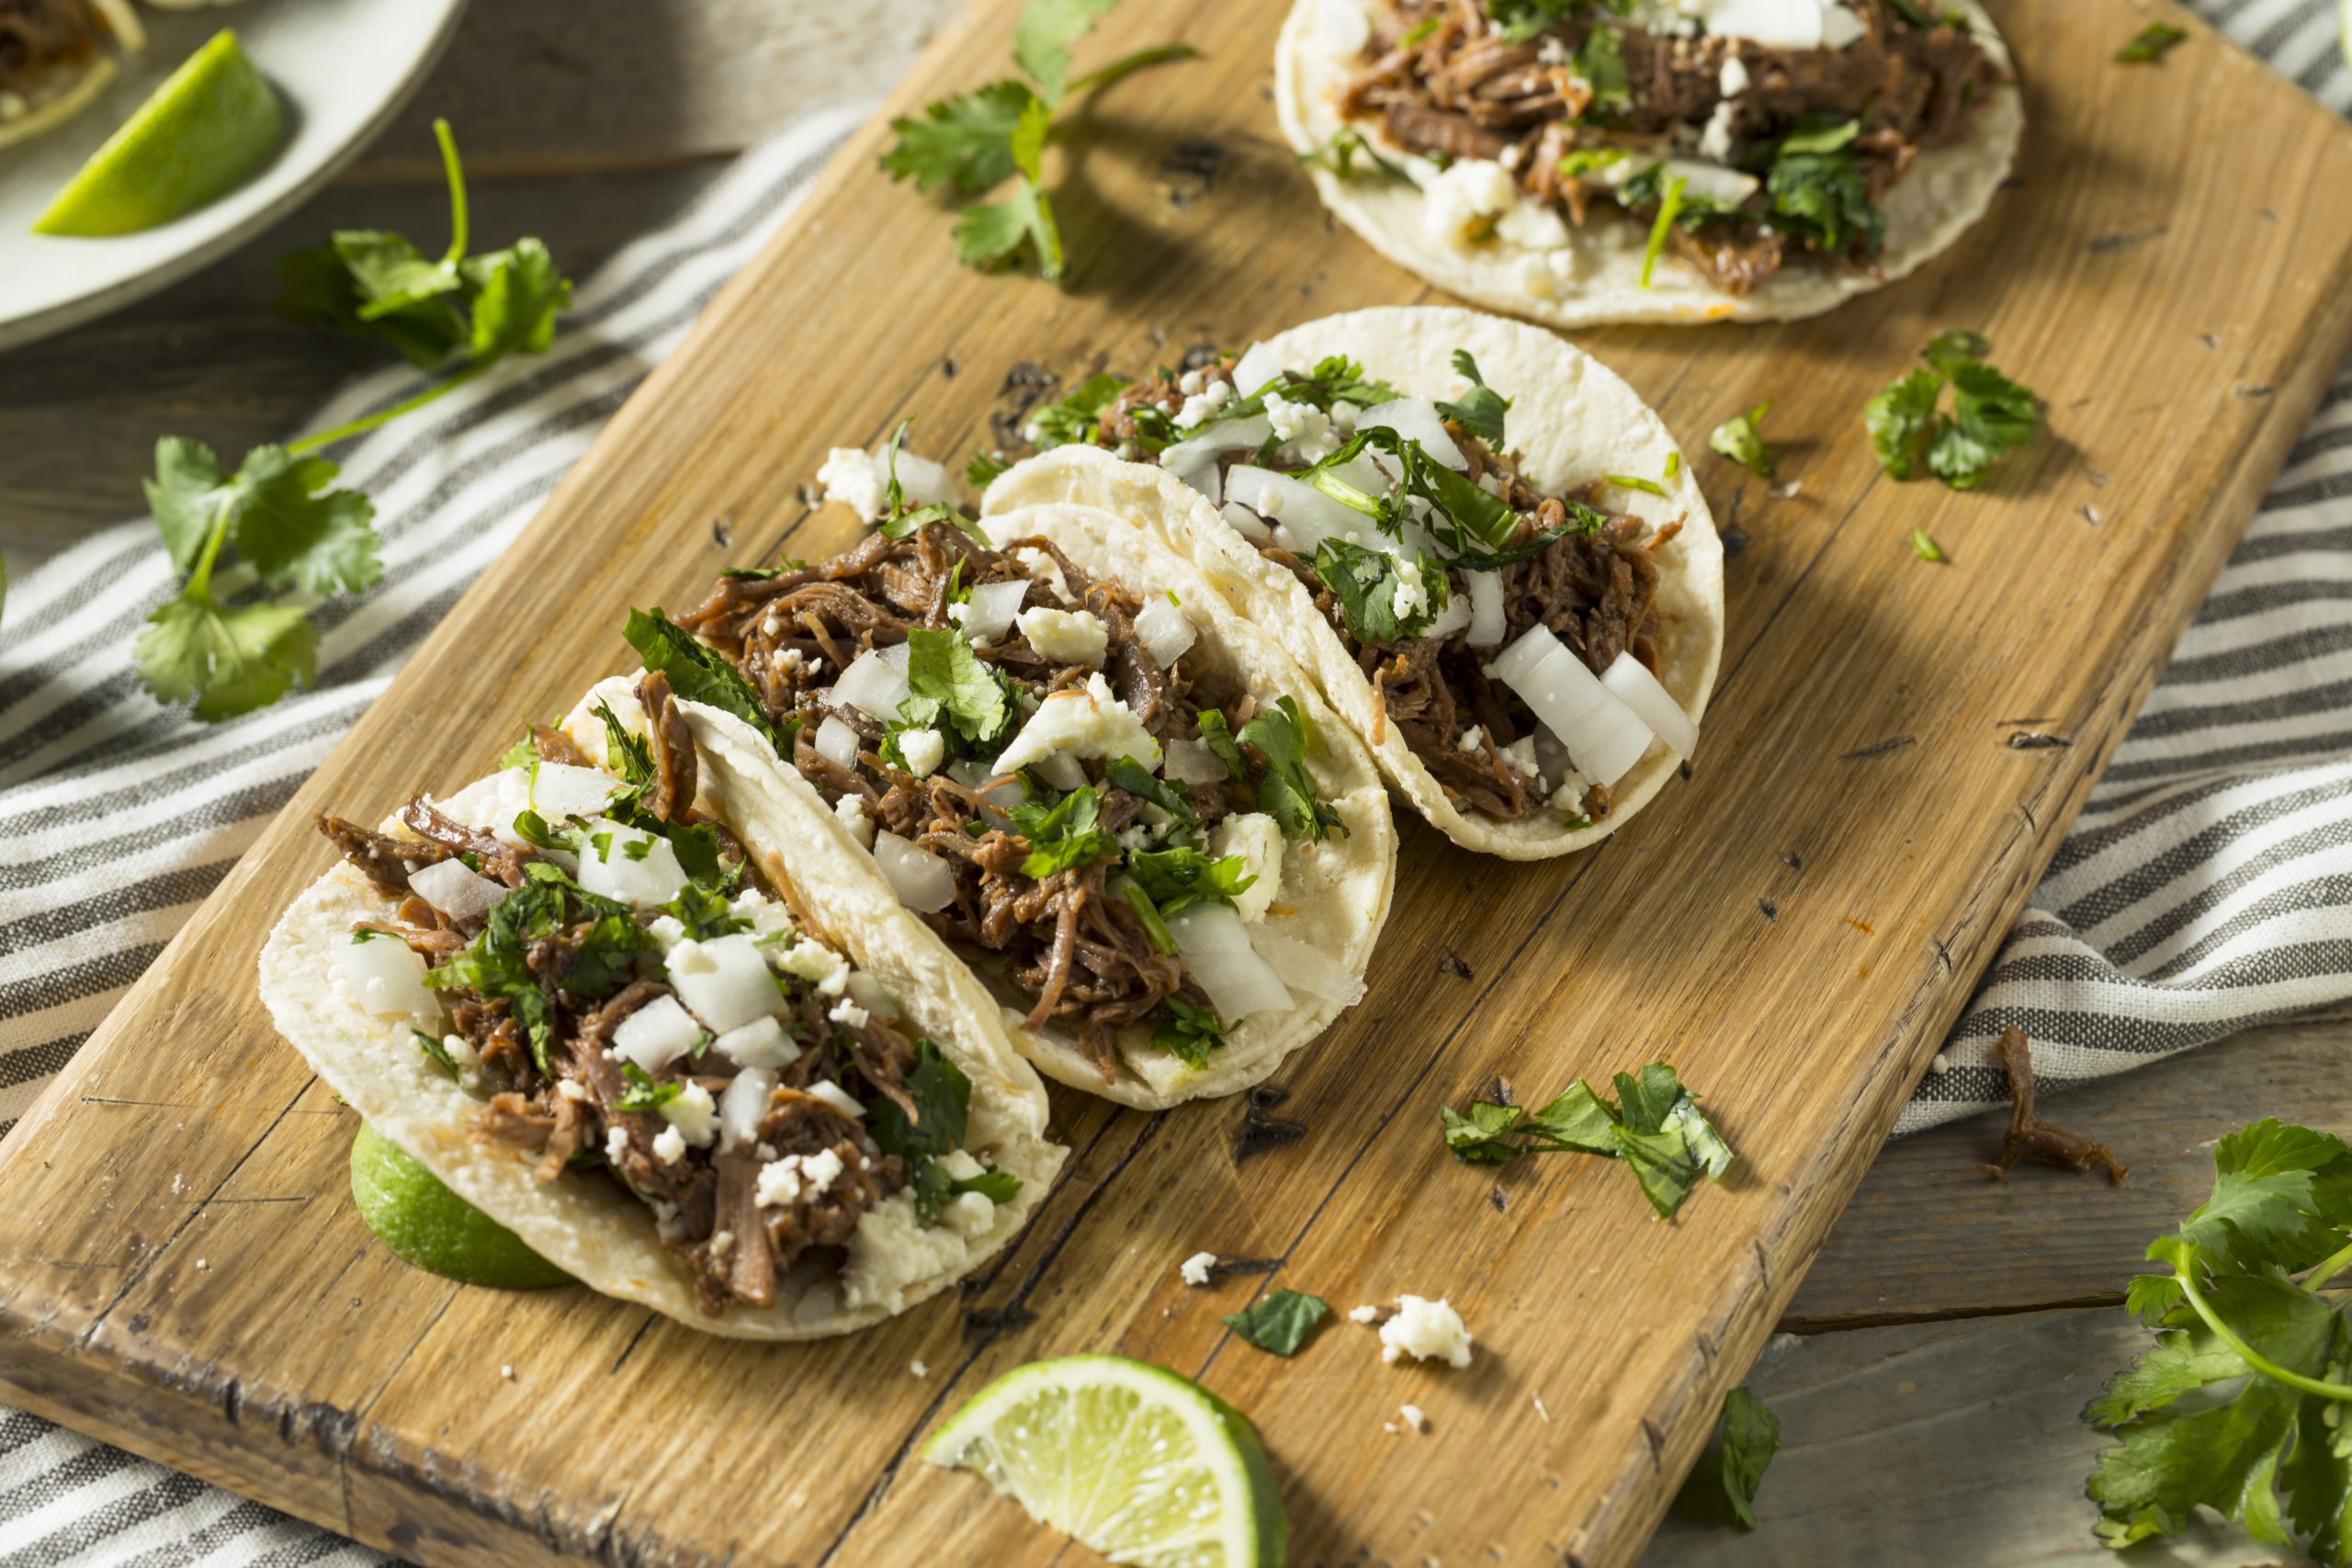 Spicy Homemade Carne Asada Tacos with Cilantro and Onion